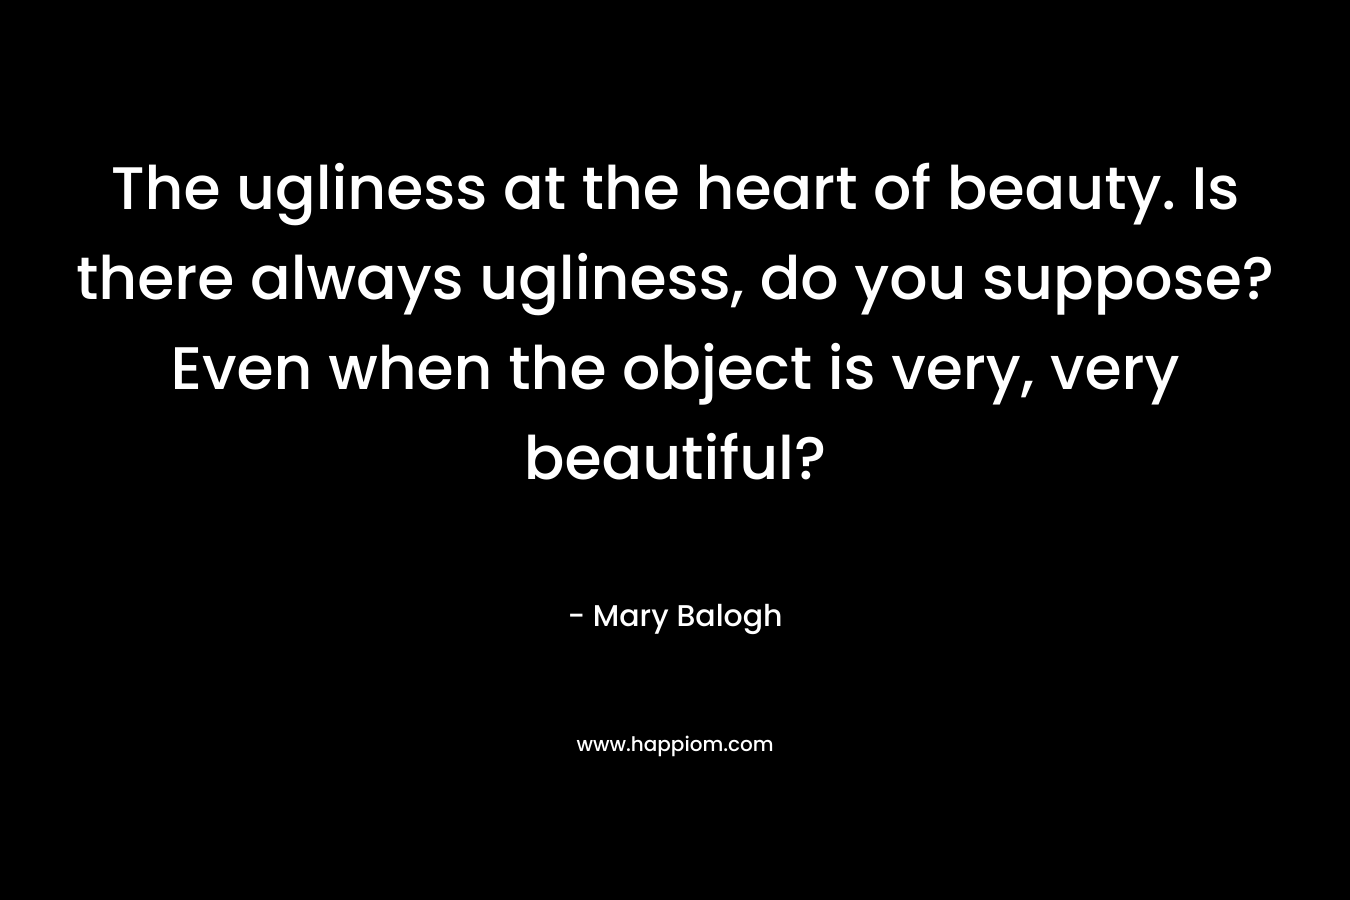 The ugliness at the heart of beauty. Is there always ugliness, do you suppose? Even when the object is very, very beautiful?